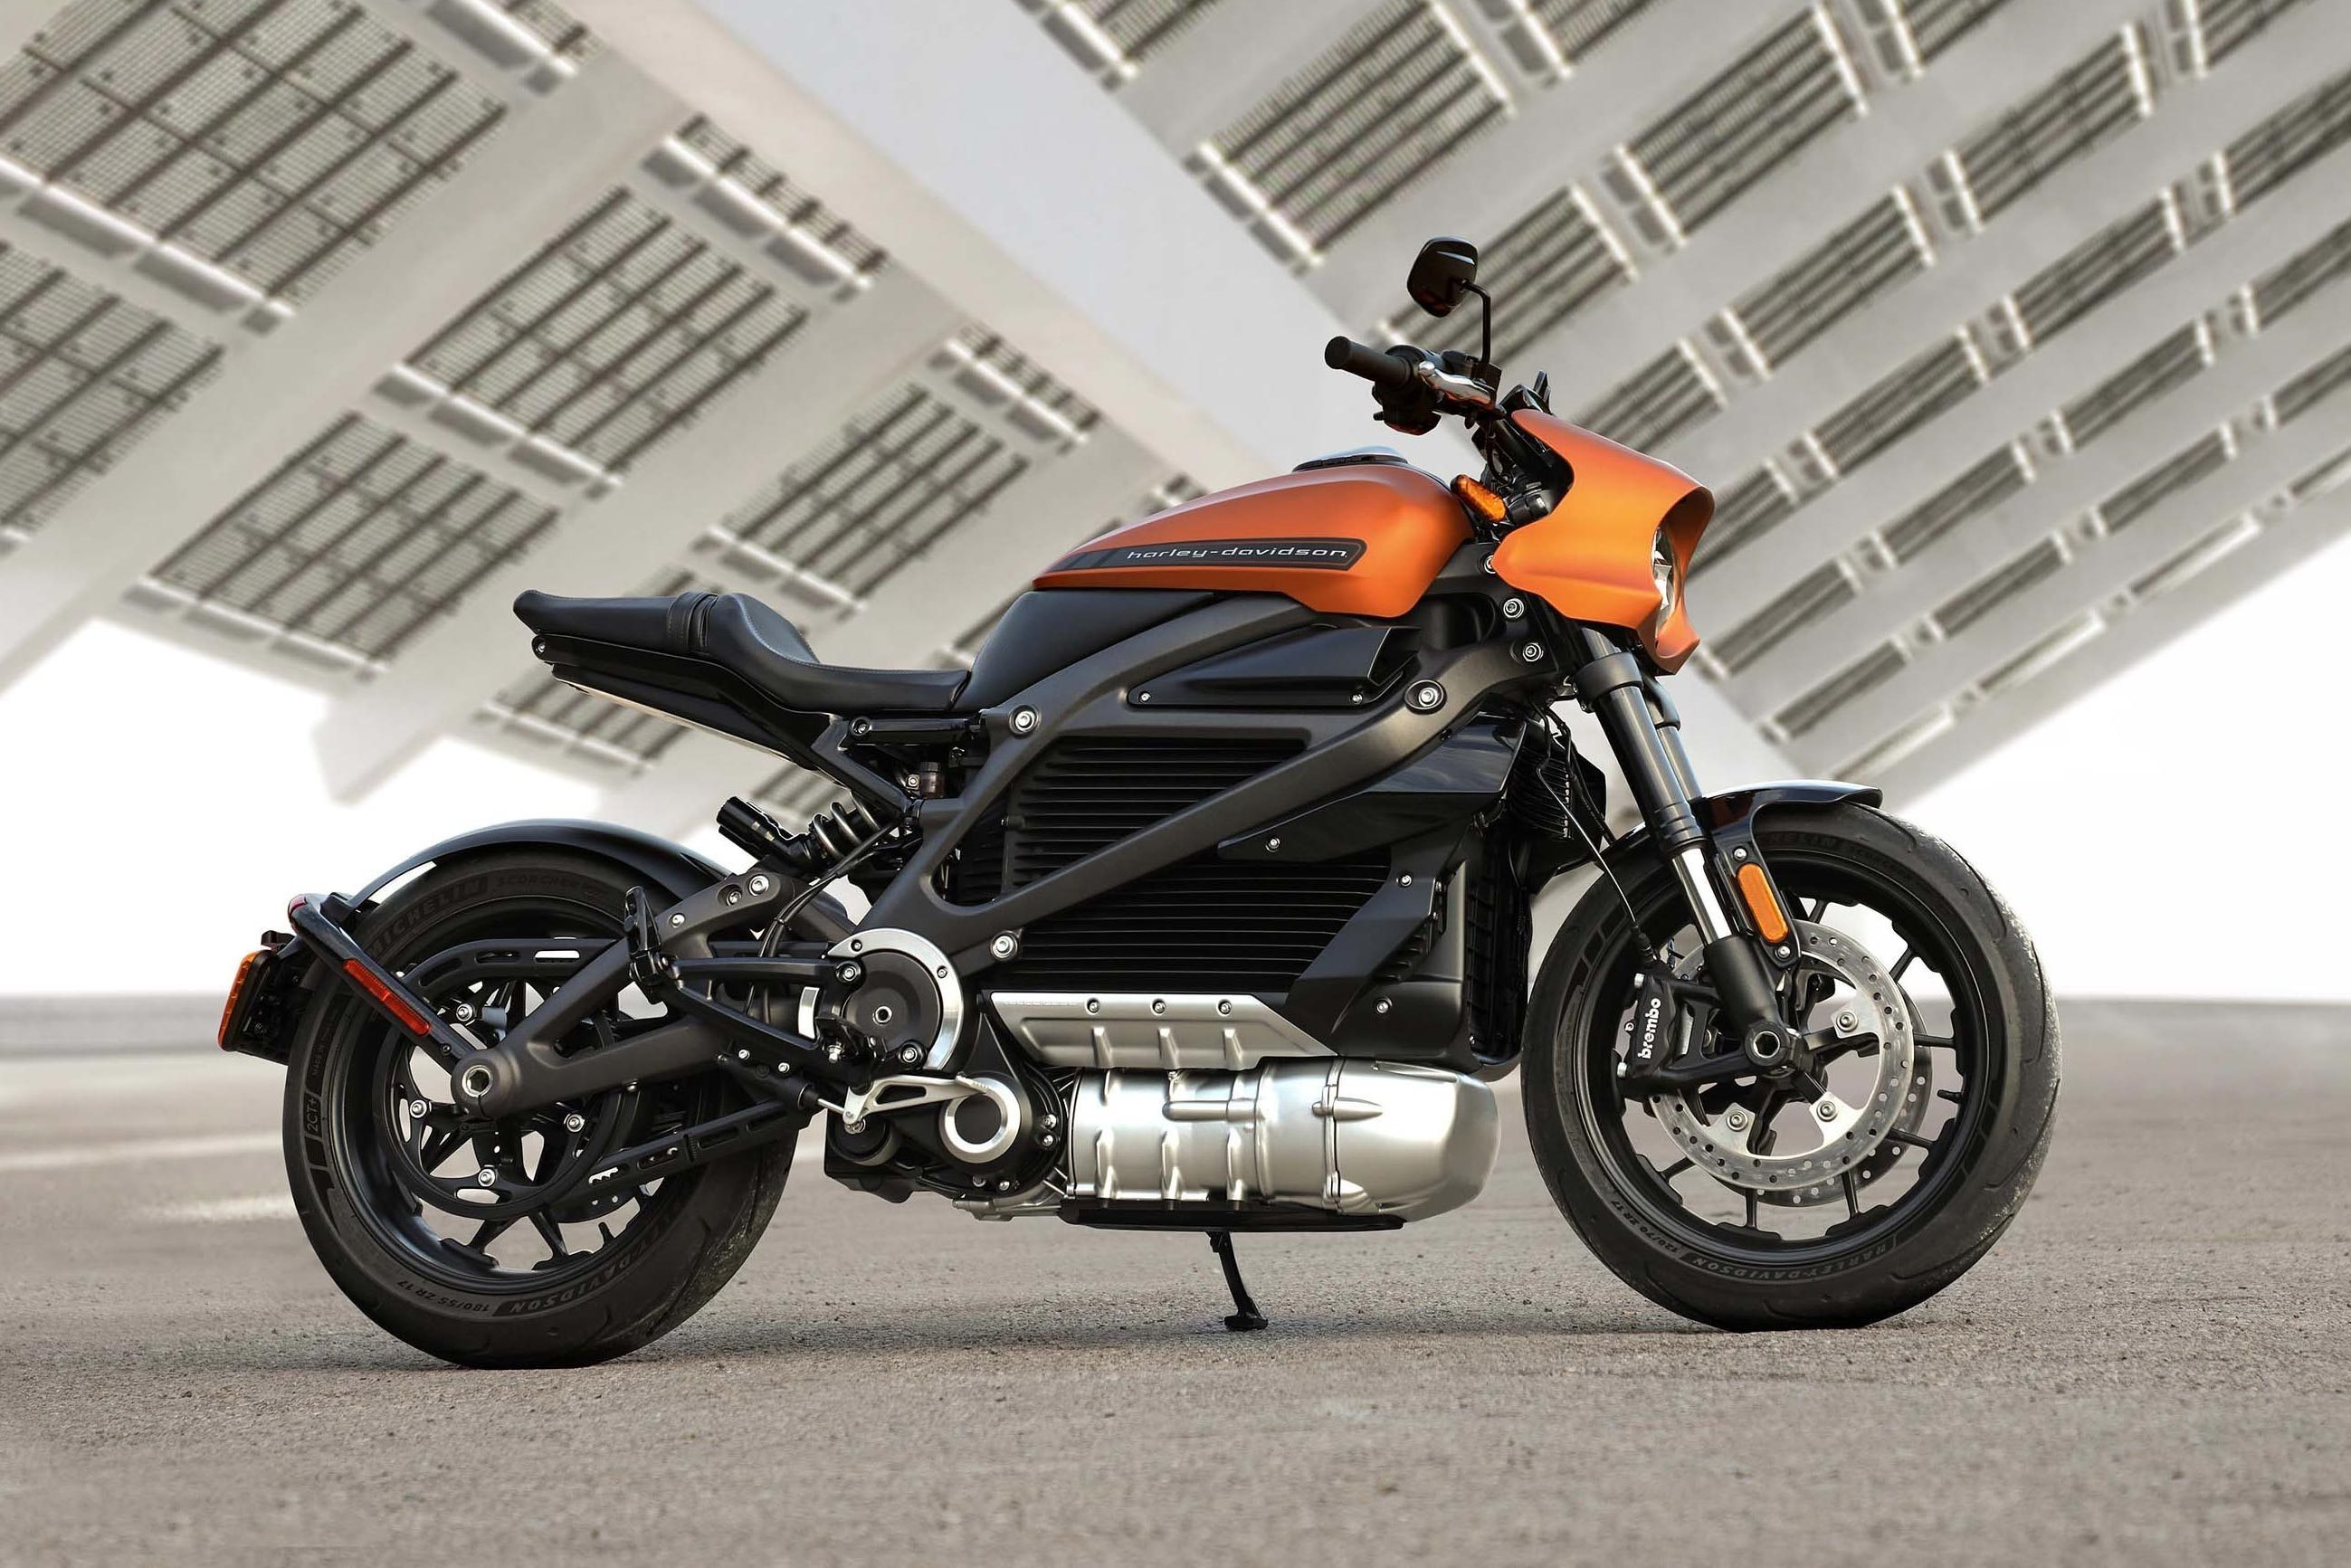 Harley Davidson Livewire Full Specs Announced Drivemag Riders